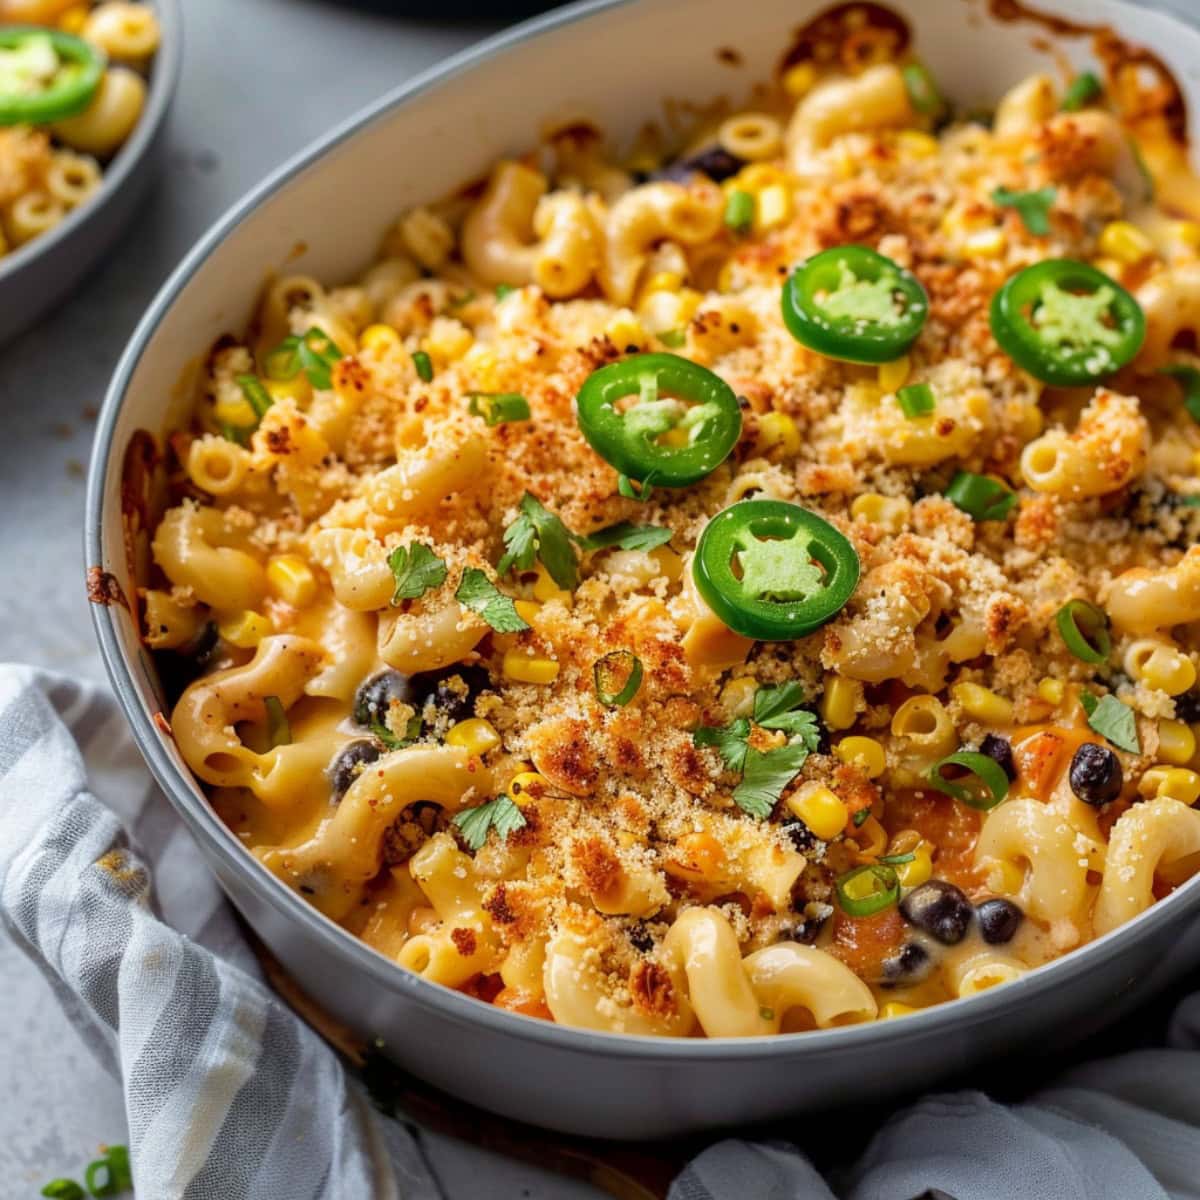 Baked Mexican Mac and Cheese with breadcrumbs